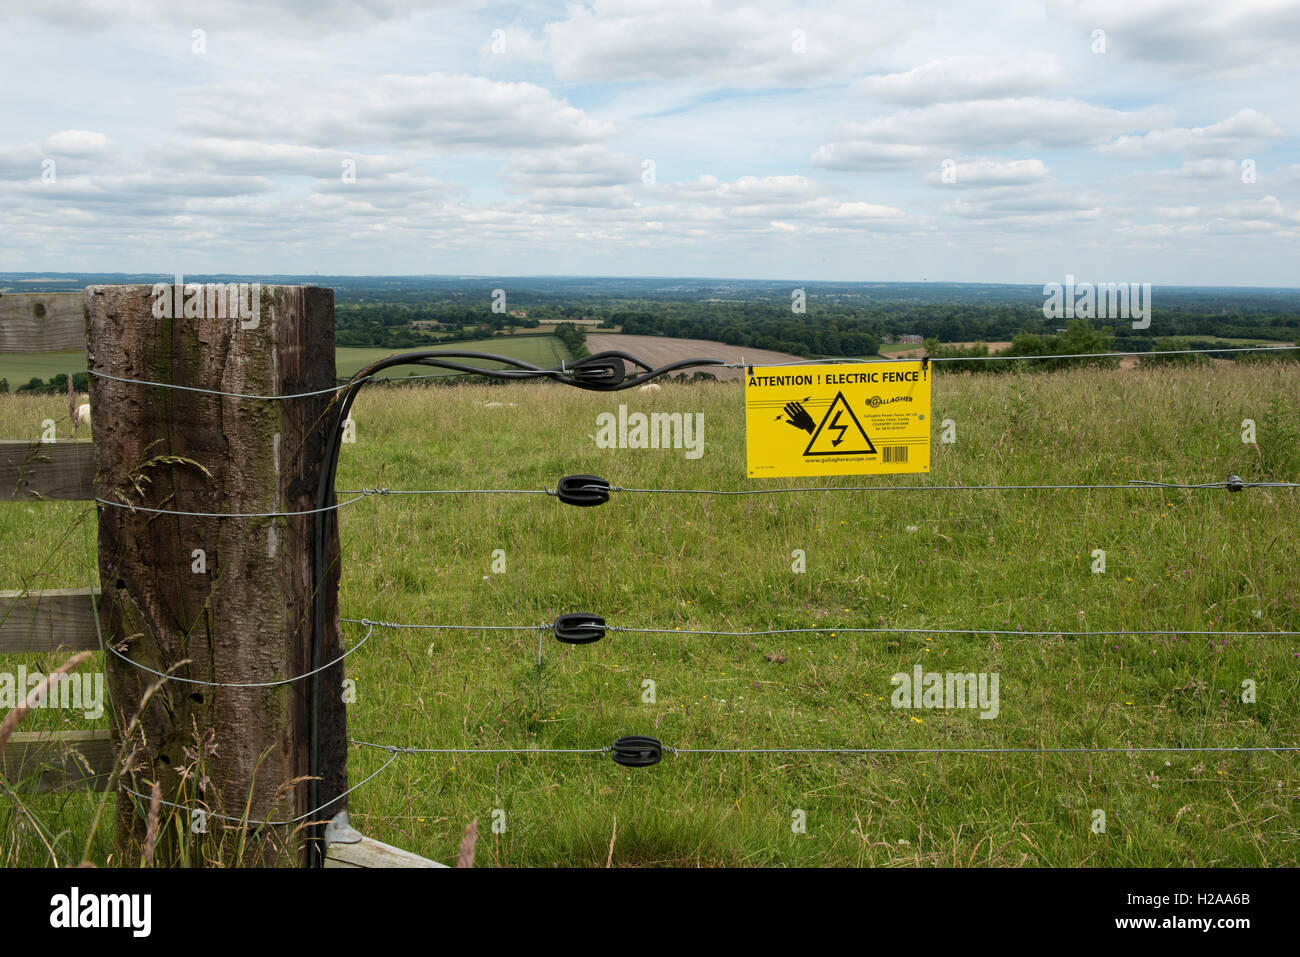 Large post with strung electric fence, insulators and warning sign for a shhep field on the Berkshire downs, July Stock Photo